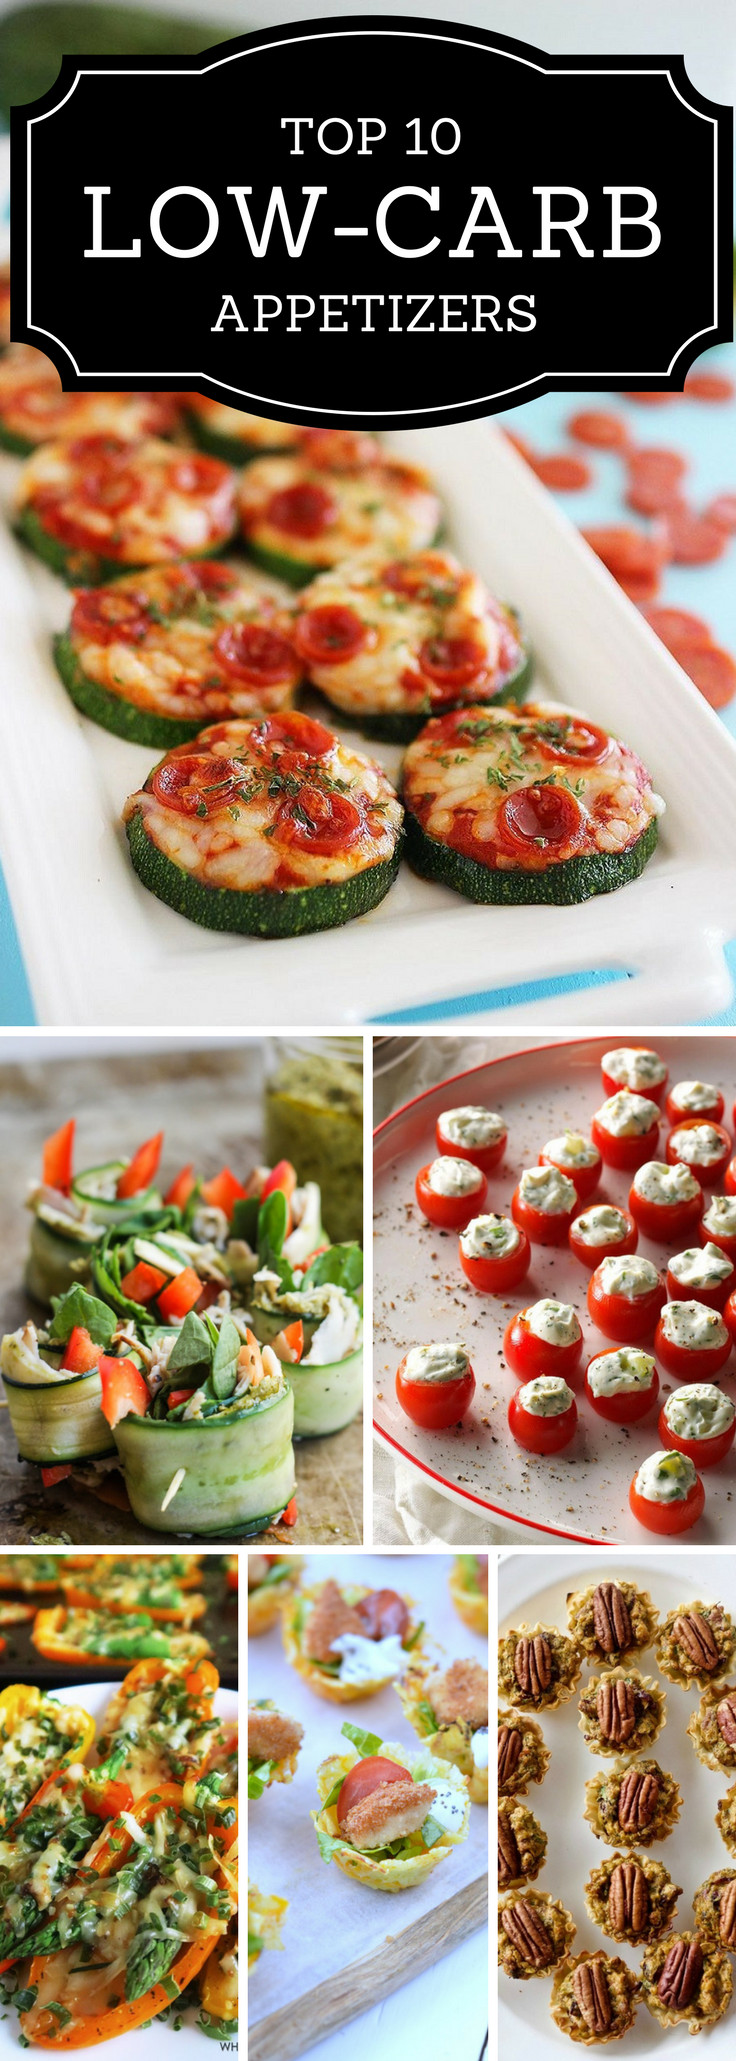 Low Carb Thanksgiving Appetizers
 Top 10 Delicious Low Carb Appetizers